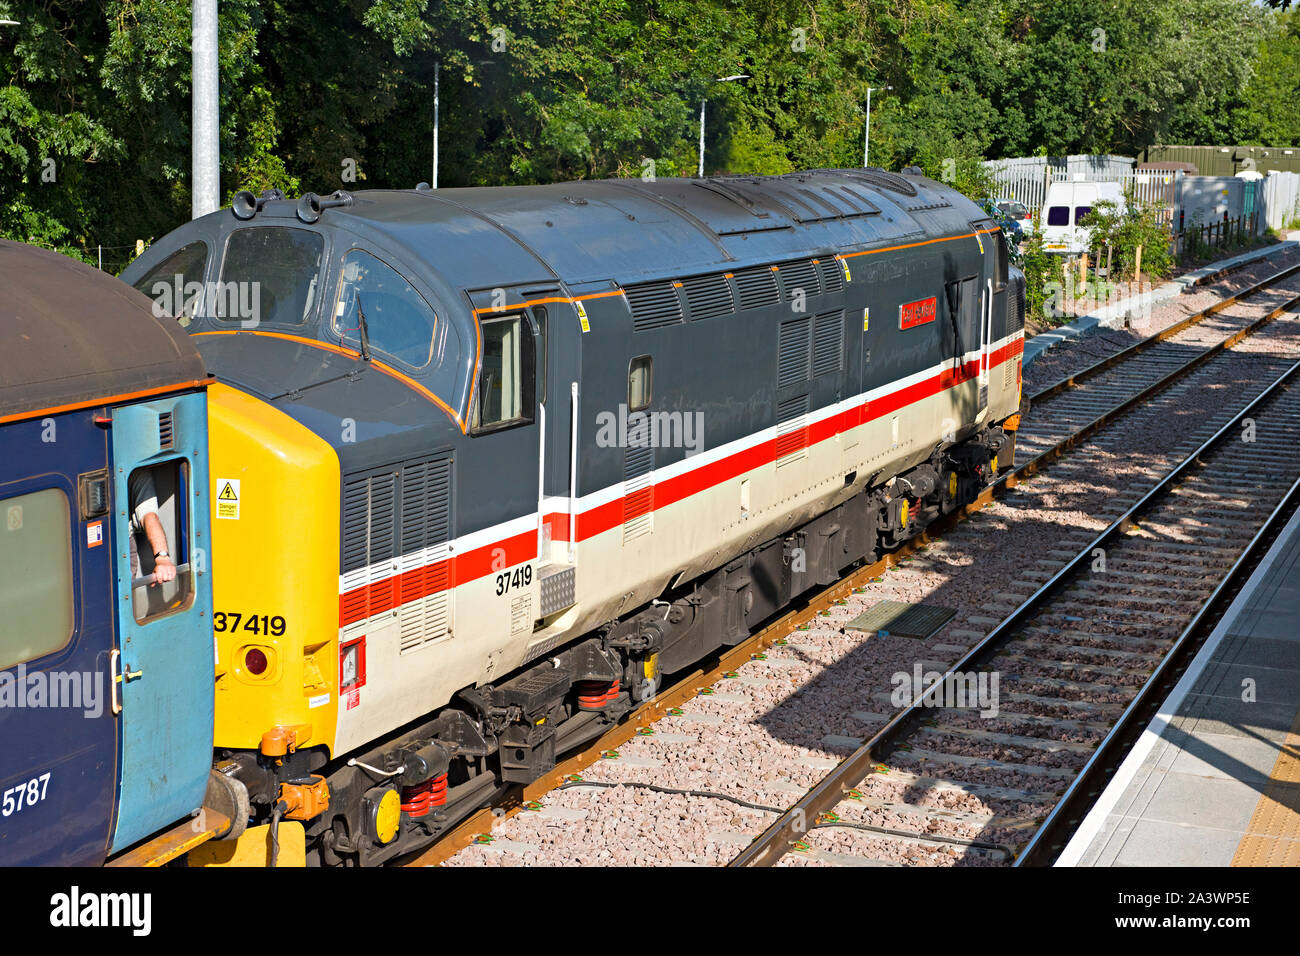 British Railways class 37 diesel locomotive no 37419 on the rear of  a passenger train from Lowestoft on the Wherry Lines in Norfolk, UK Stock Photo